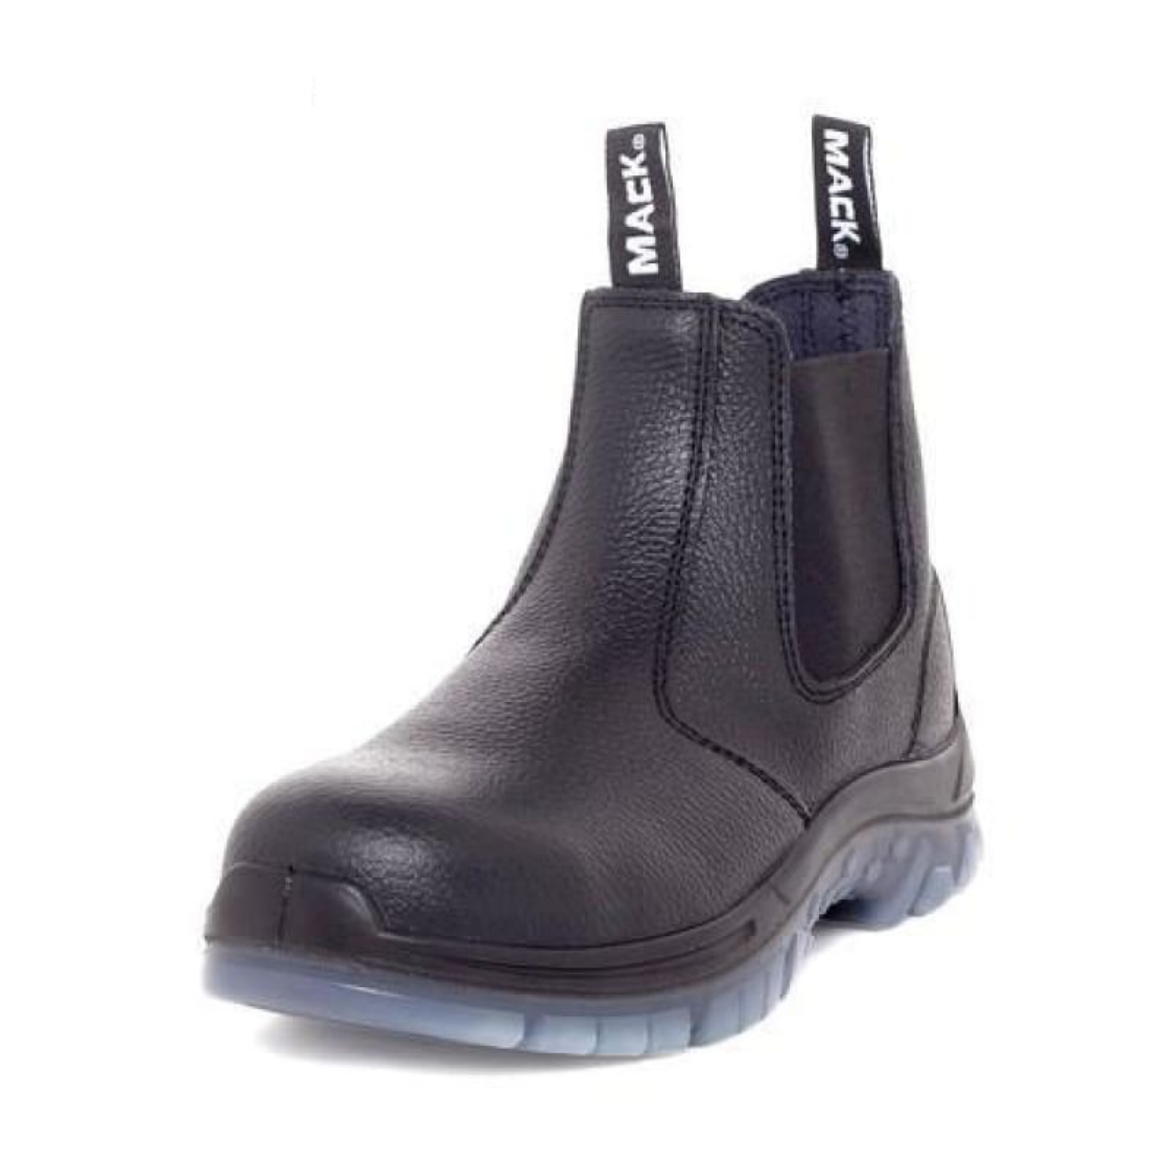 Picture of Mack, Tradie, Safety Boot, Slip-On